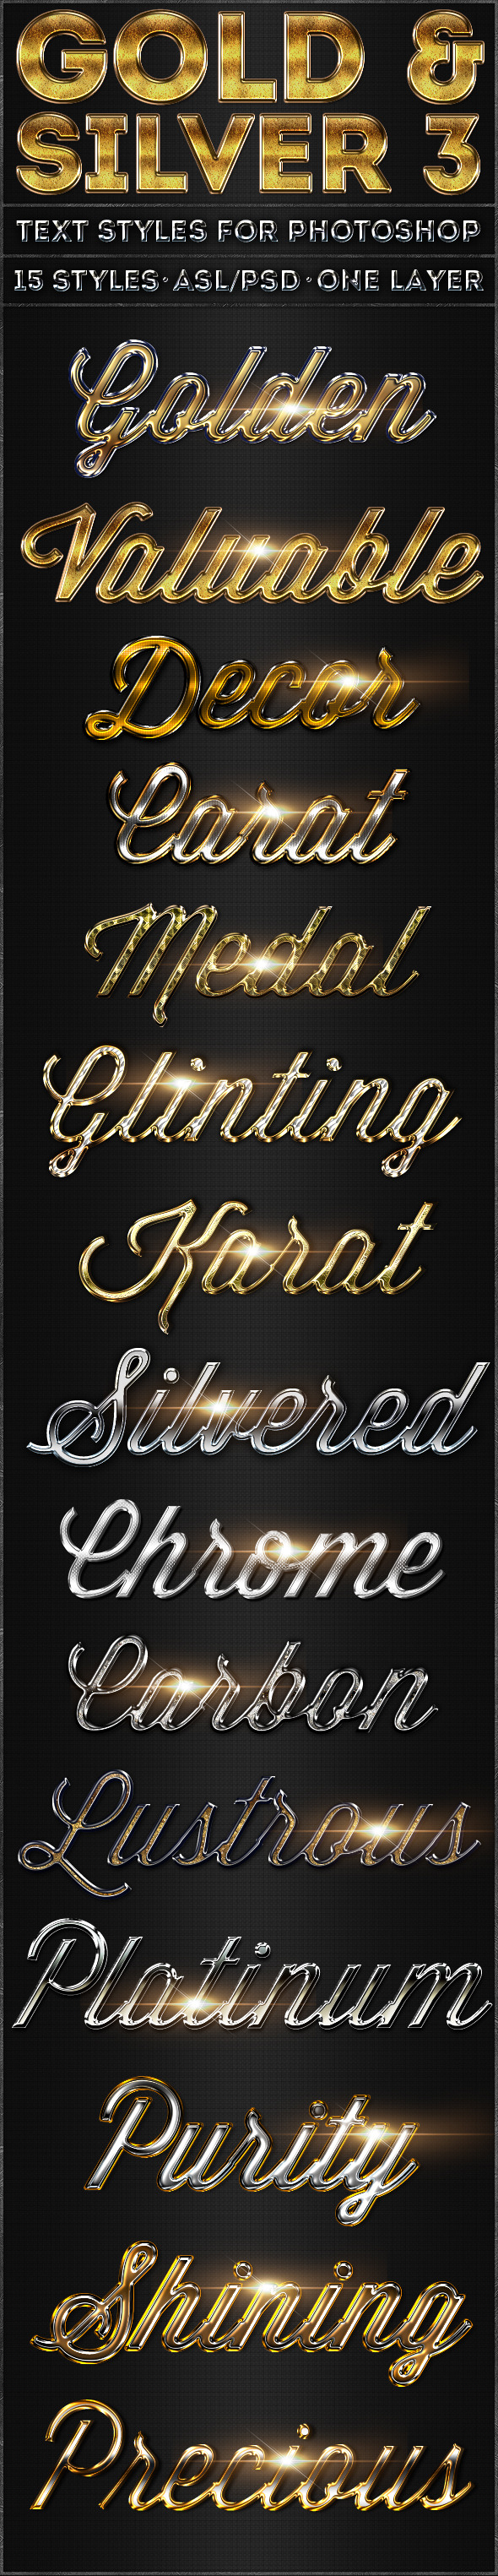 Gold & Silver 3 - Text Styles